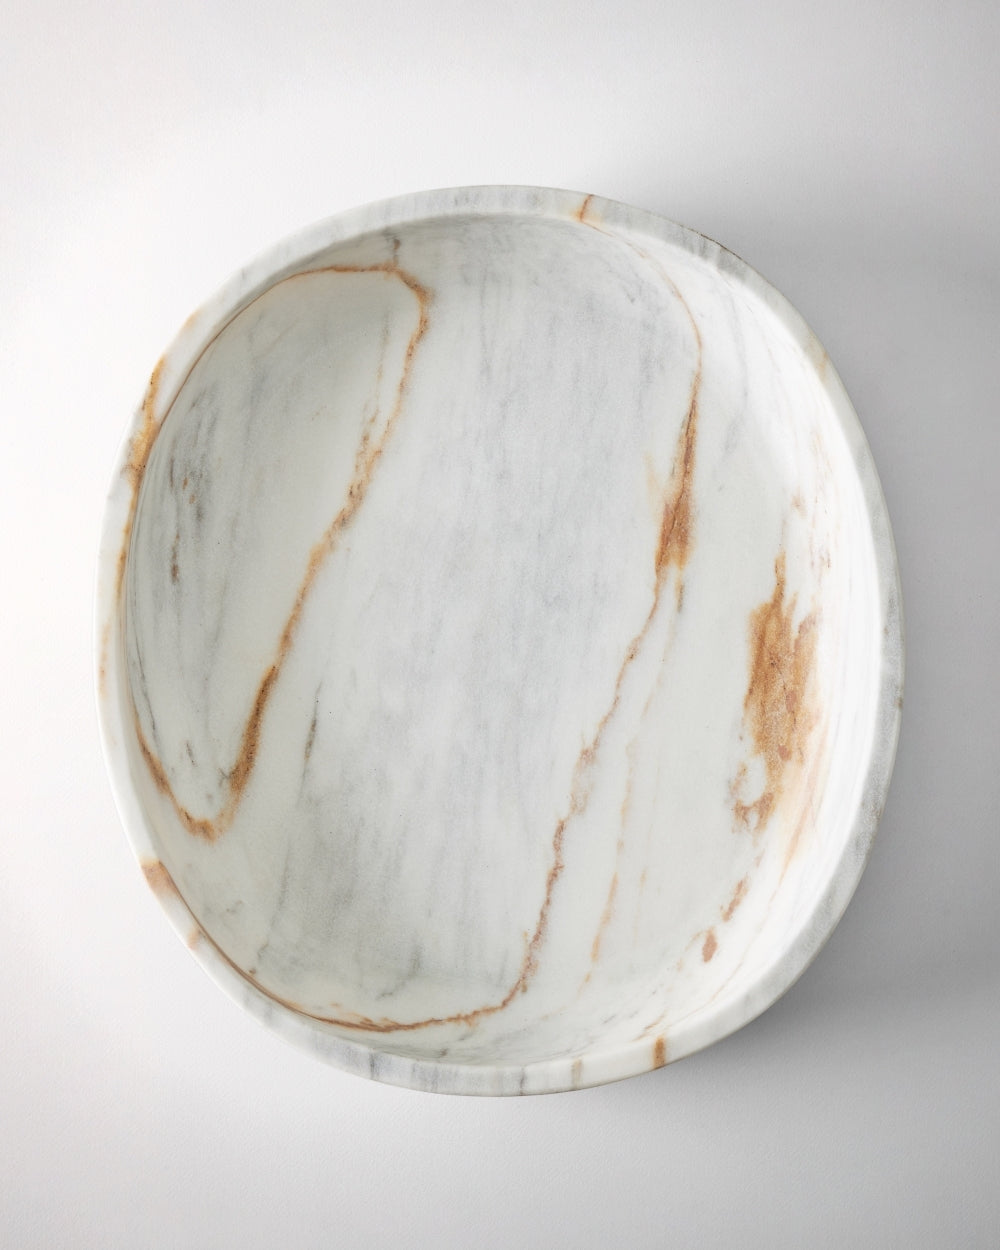 Indian Marble Serving Fruit Handmade Bowl for Gifts